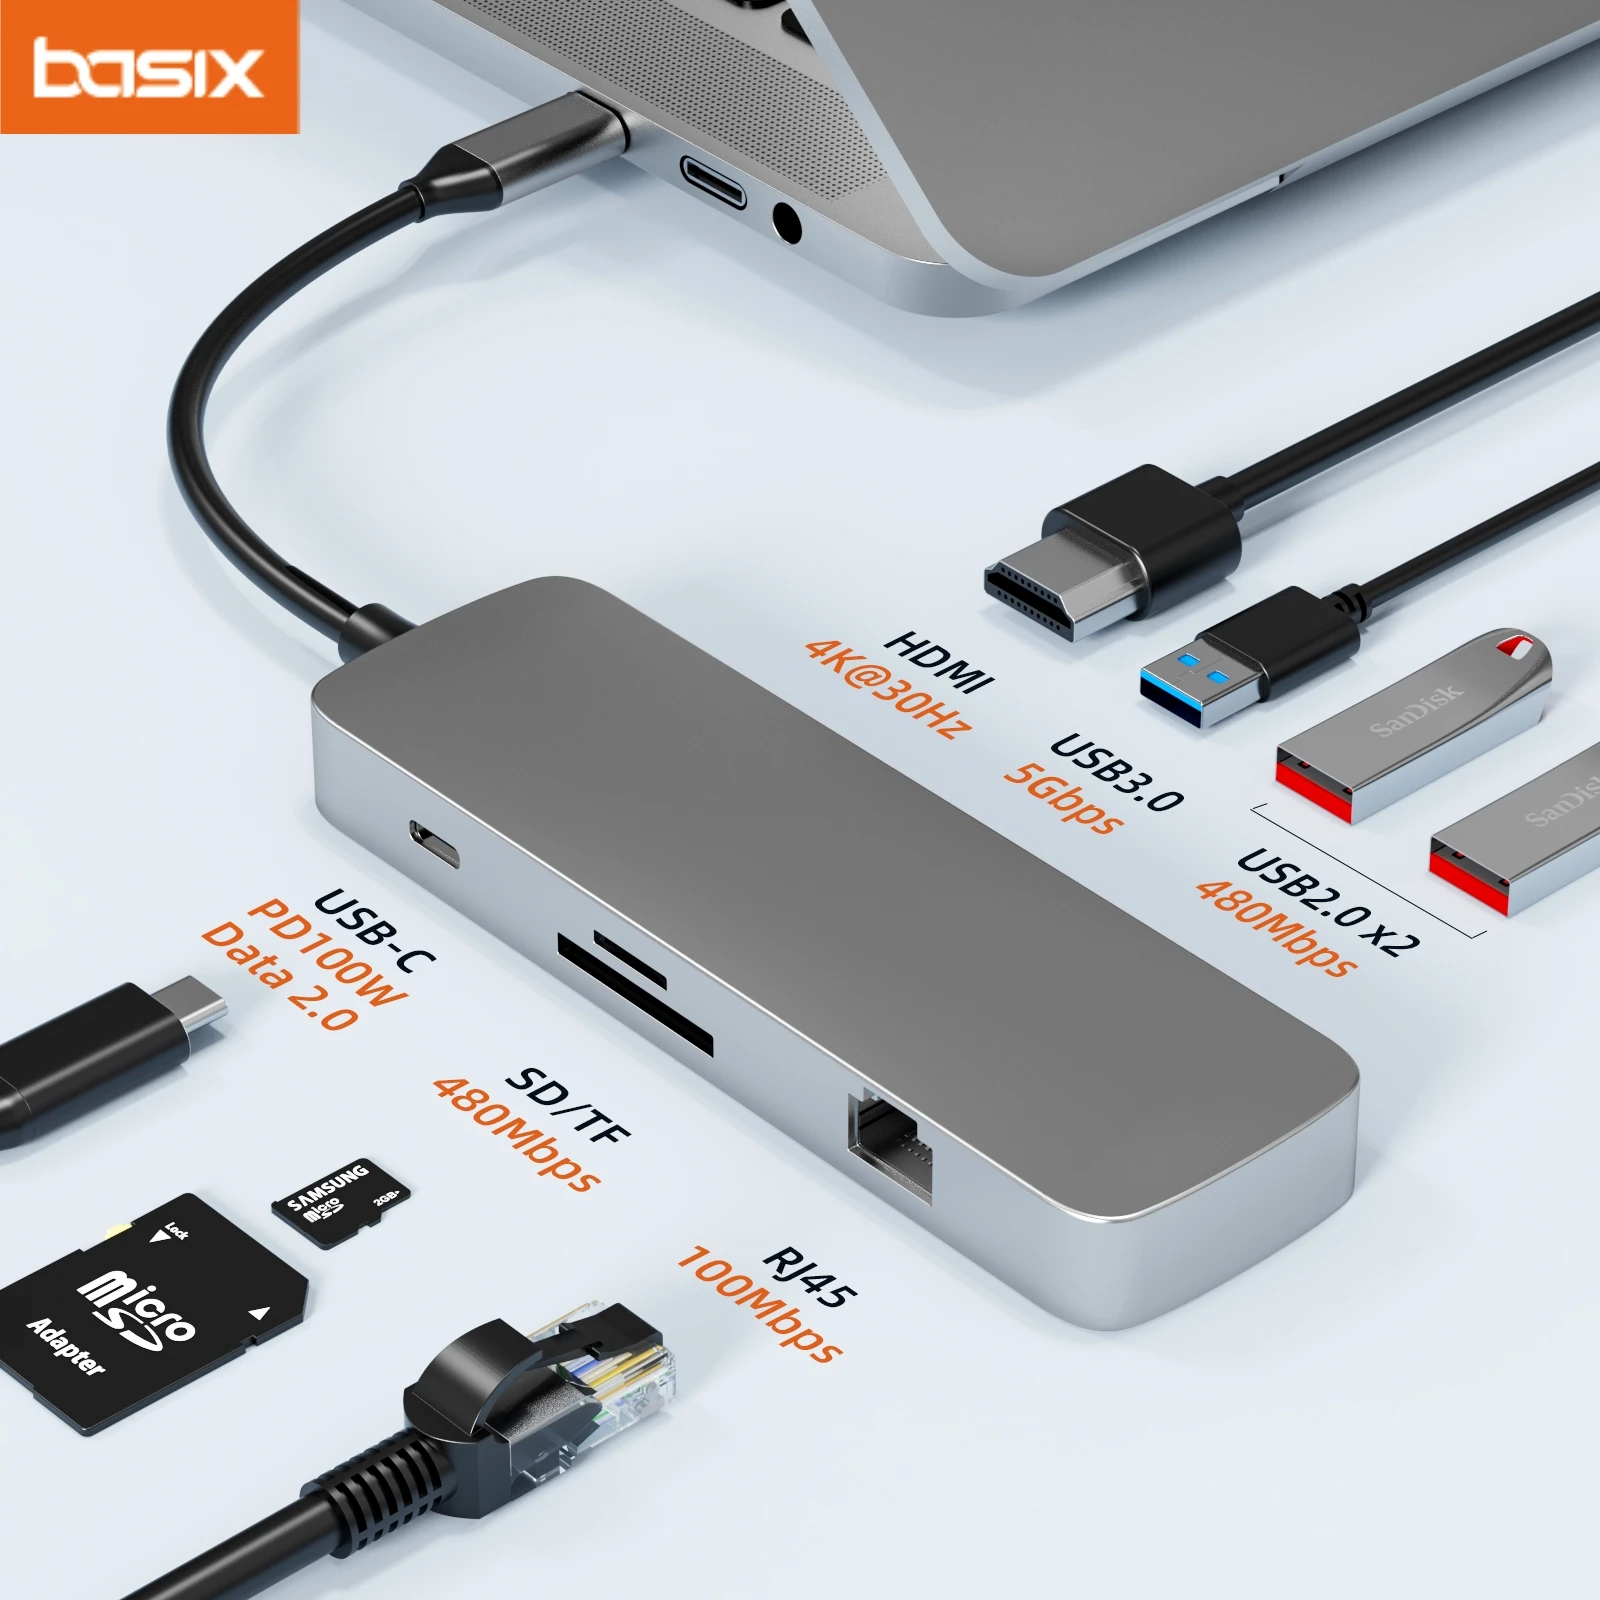 

Basix USB C Hub 8in1 Type-C To 4K HDMI-compatible Adapter with RJ45 SD/TF Card Reader PD for Macbook Air pro MI M2 Computer